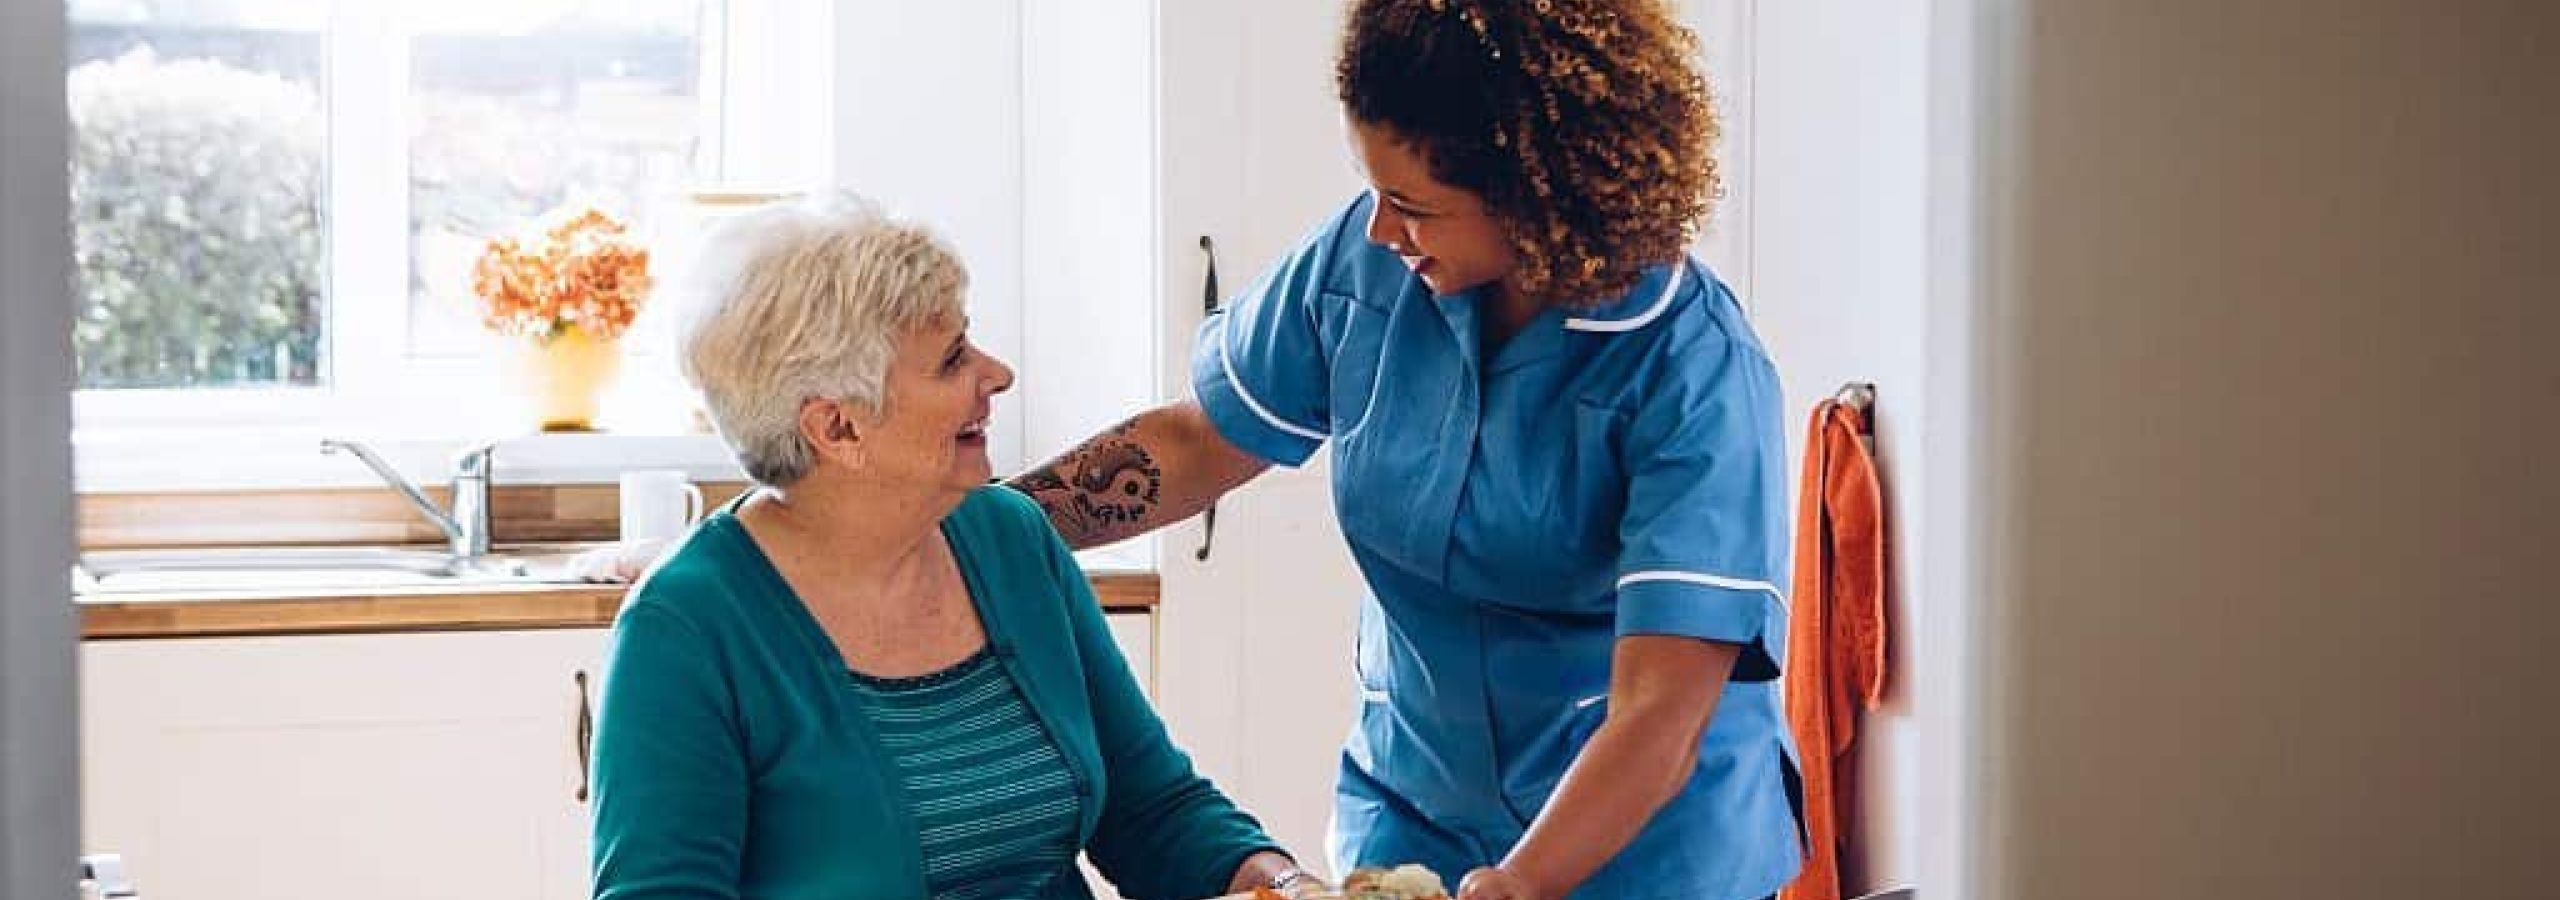 The Importance of Aged Care Services in the Modern World